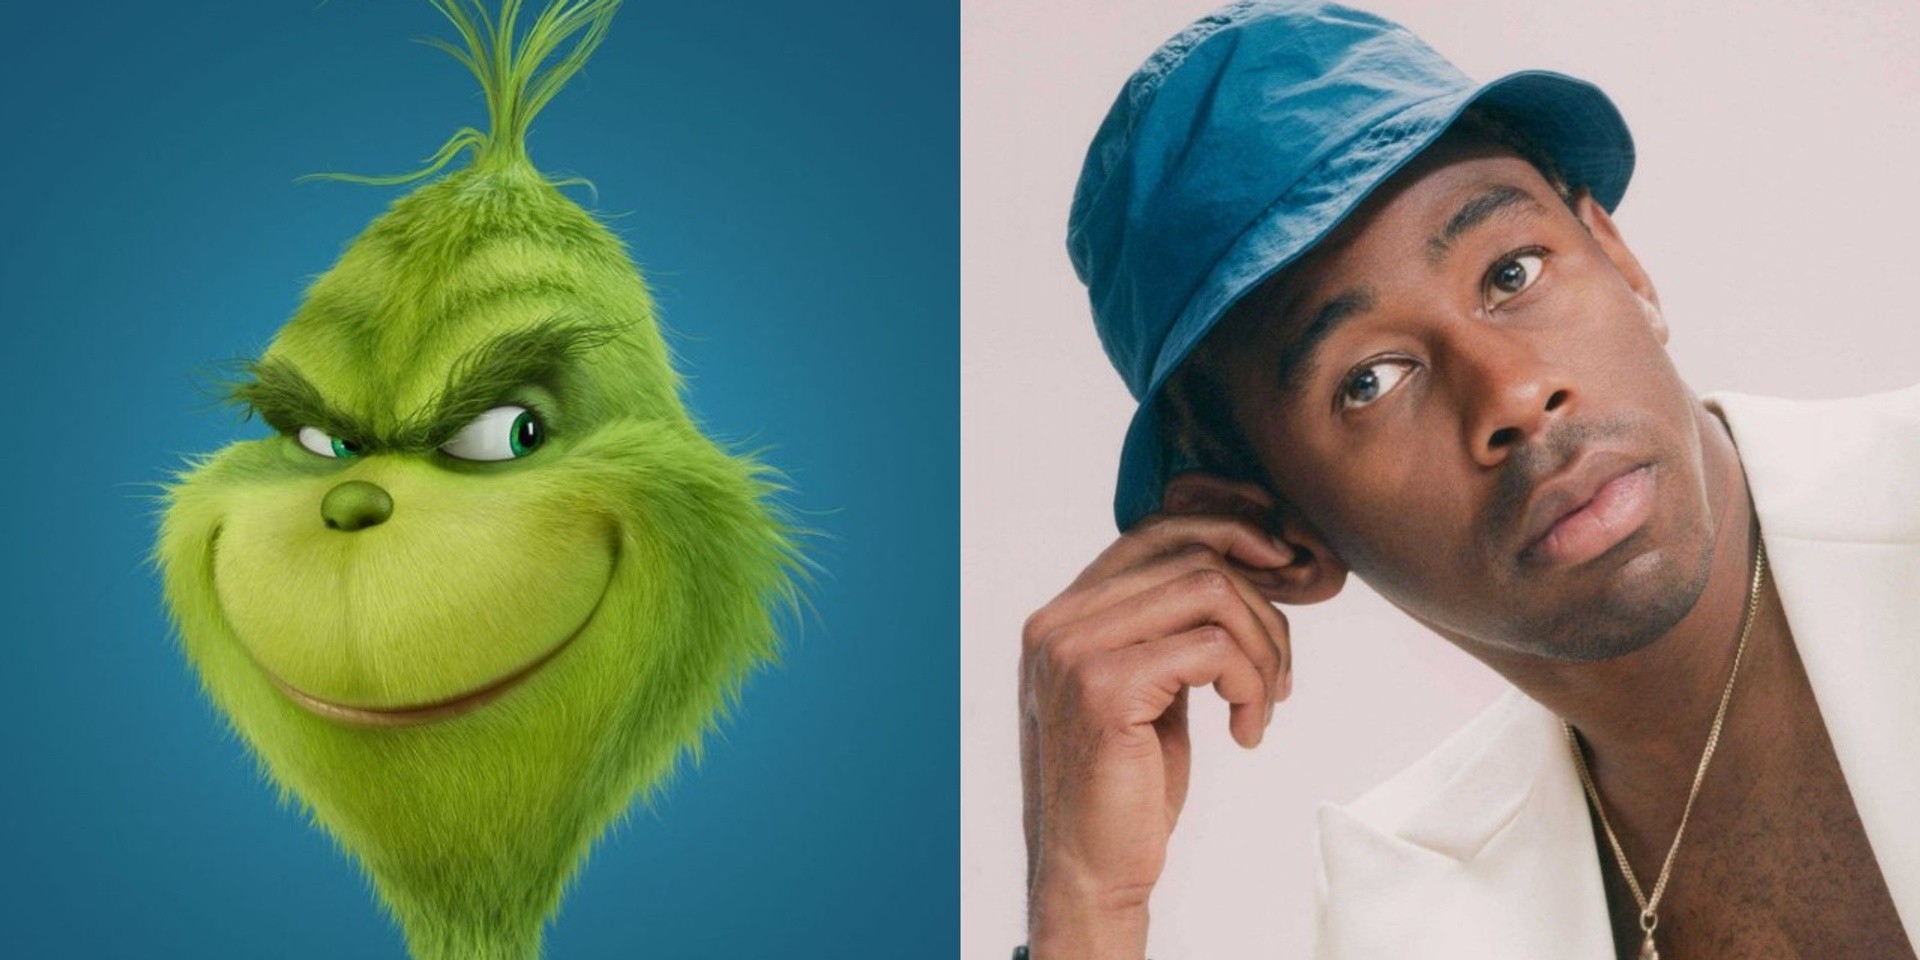 Tyler, The Creator's track from The Grinch movie soundtrack released – listen